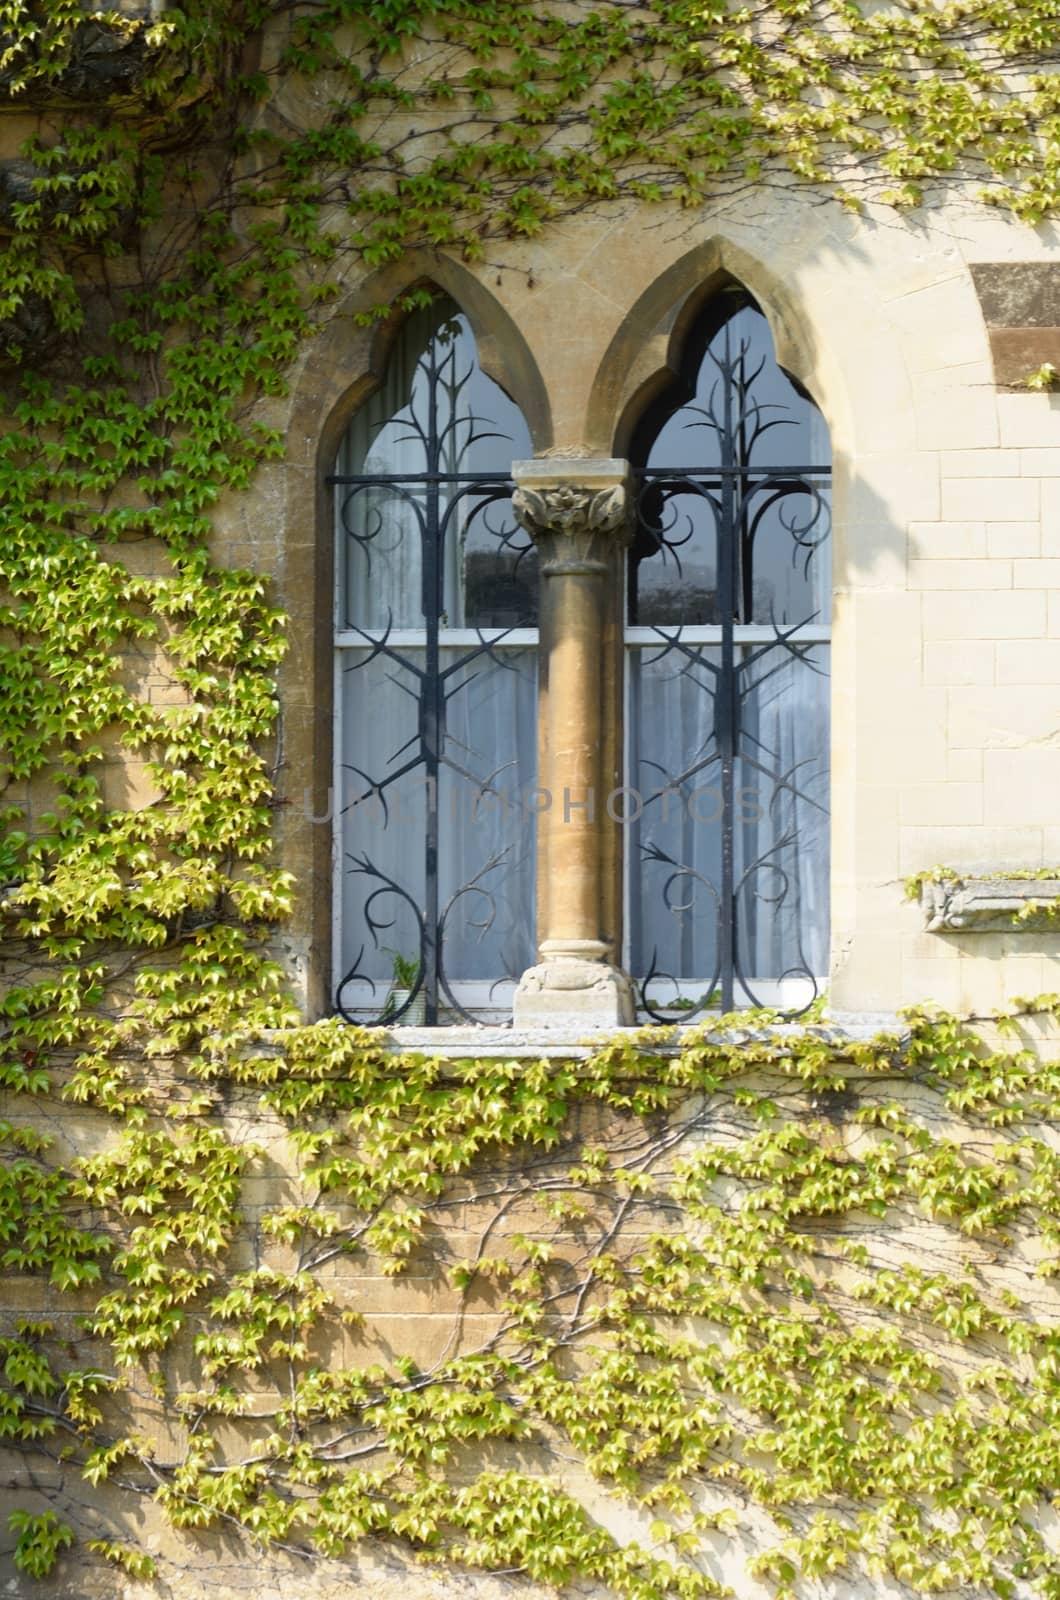 Ivy surrounding old arched window